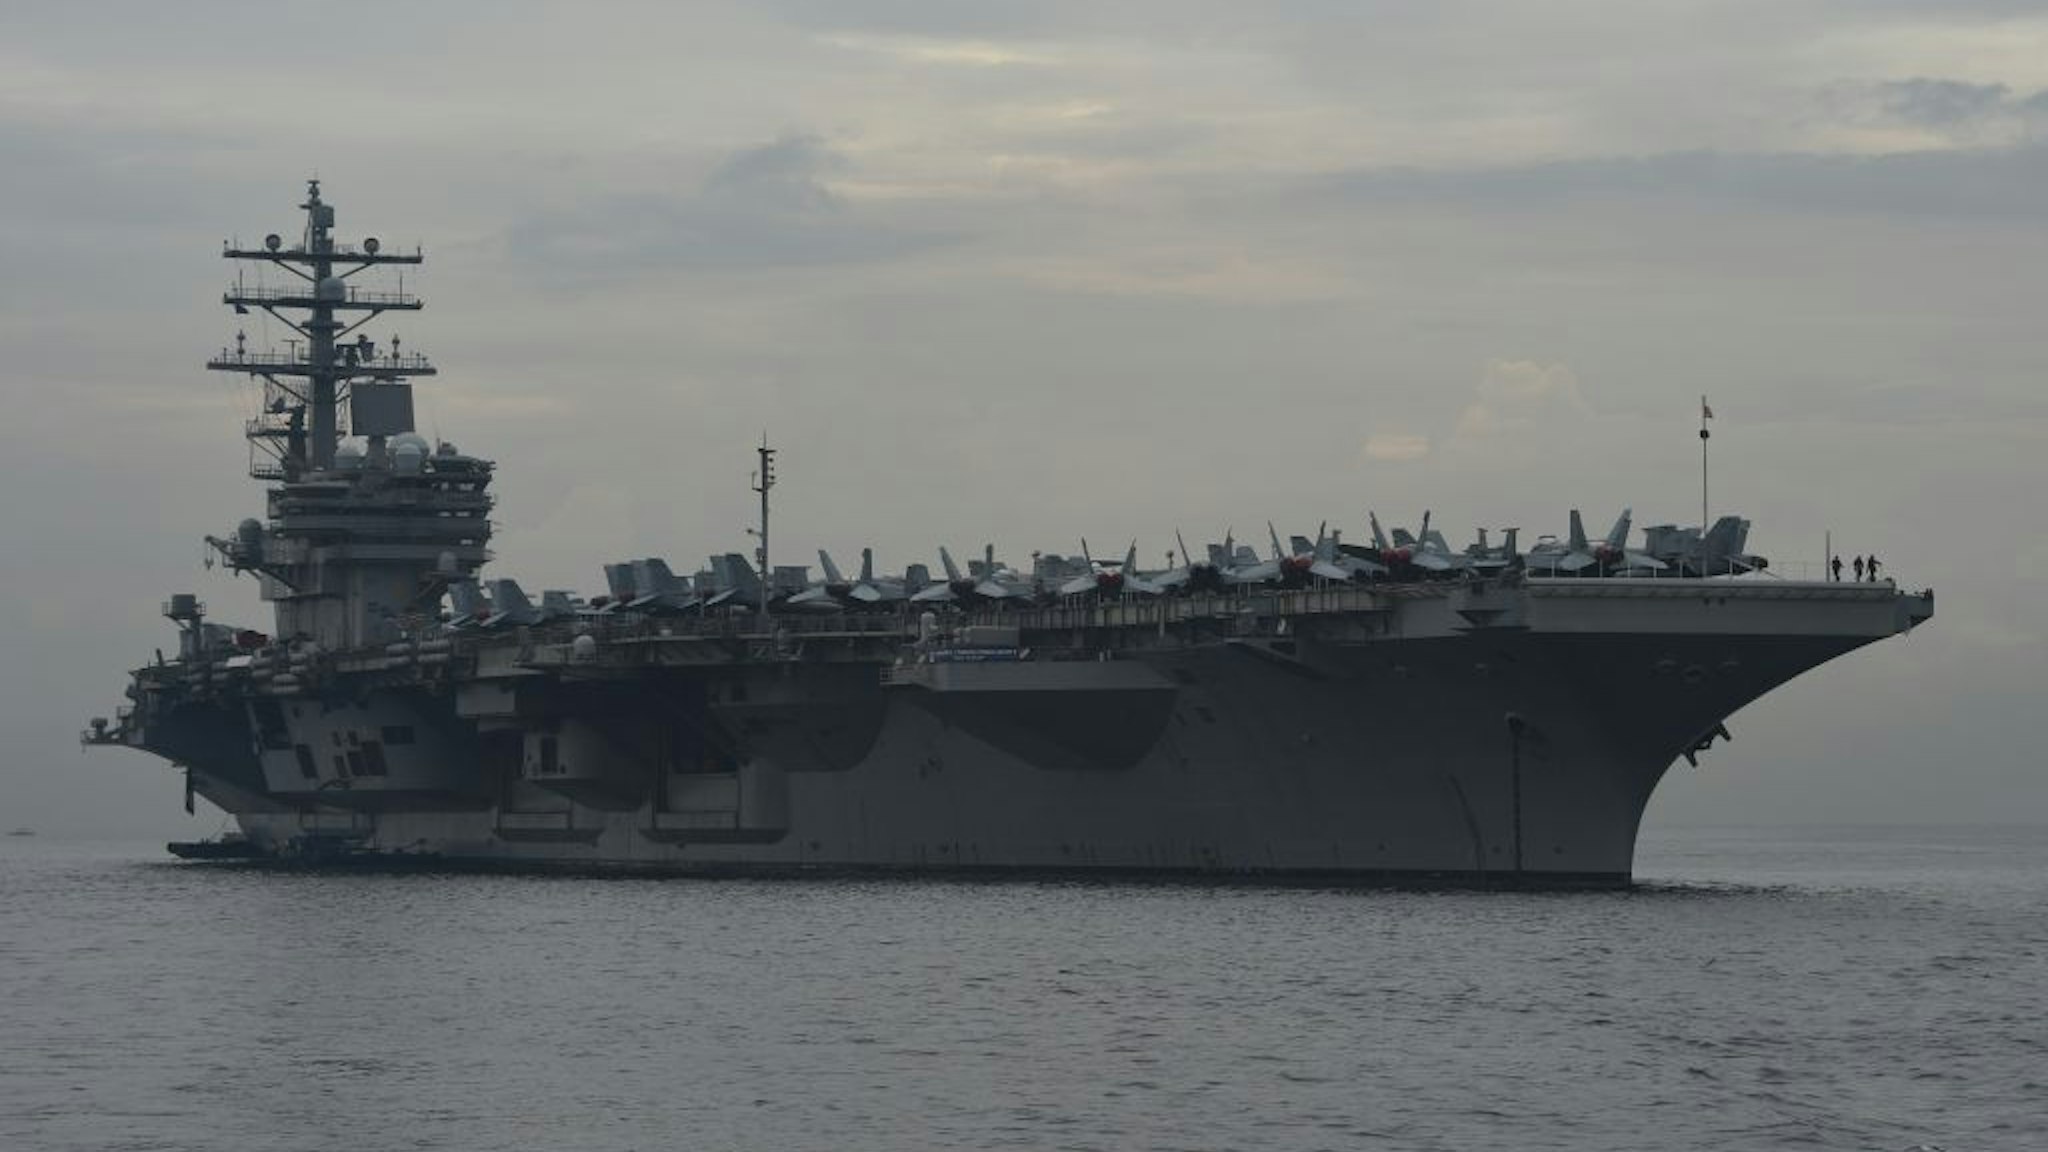 This photo taken on June 26, 2018 shows the nuclear-powered aircraft carrier USS Ronald Reagan (CVN-76) anchored off Manila bay. - A US aircraft carrier visited the Philippines on June 26, the third such call in four months, as its commander cited America's "enduring presence" in a region where China's military aims have raised tensions. (Photo by TED ALJIBE / AFP) (Photo credit should read TED ALJIBE/AFP via Getty Images)